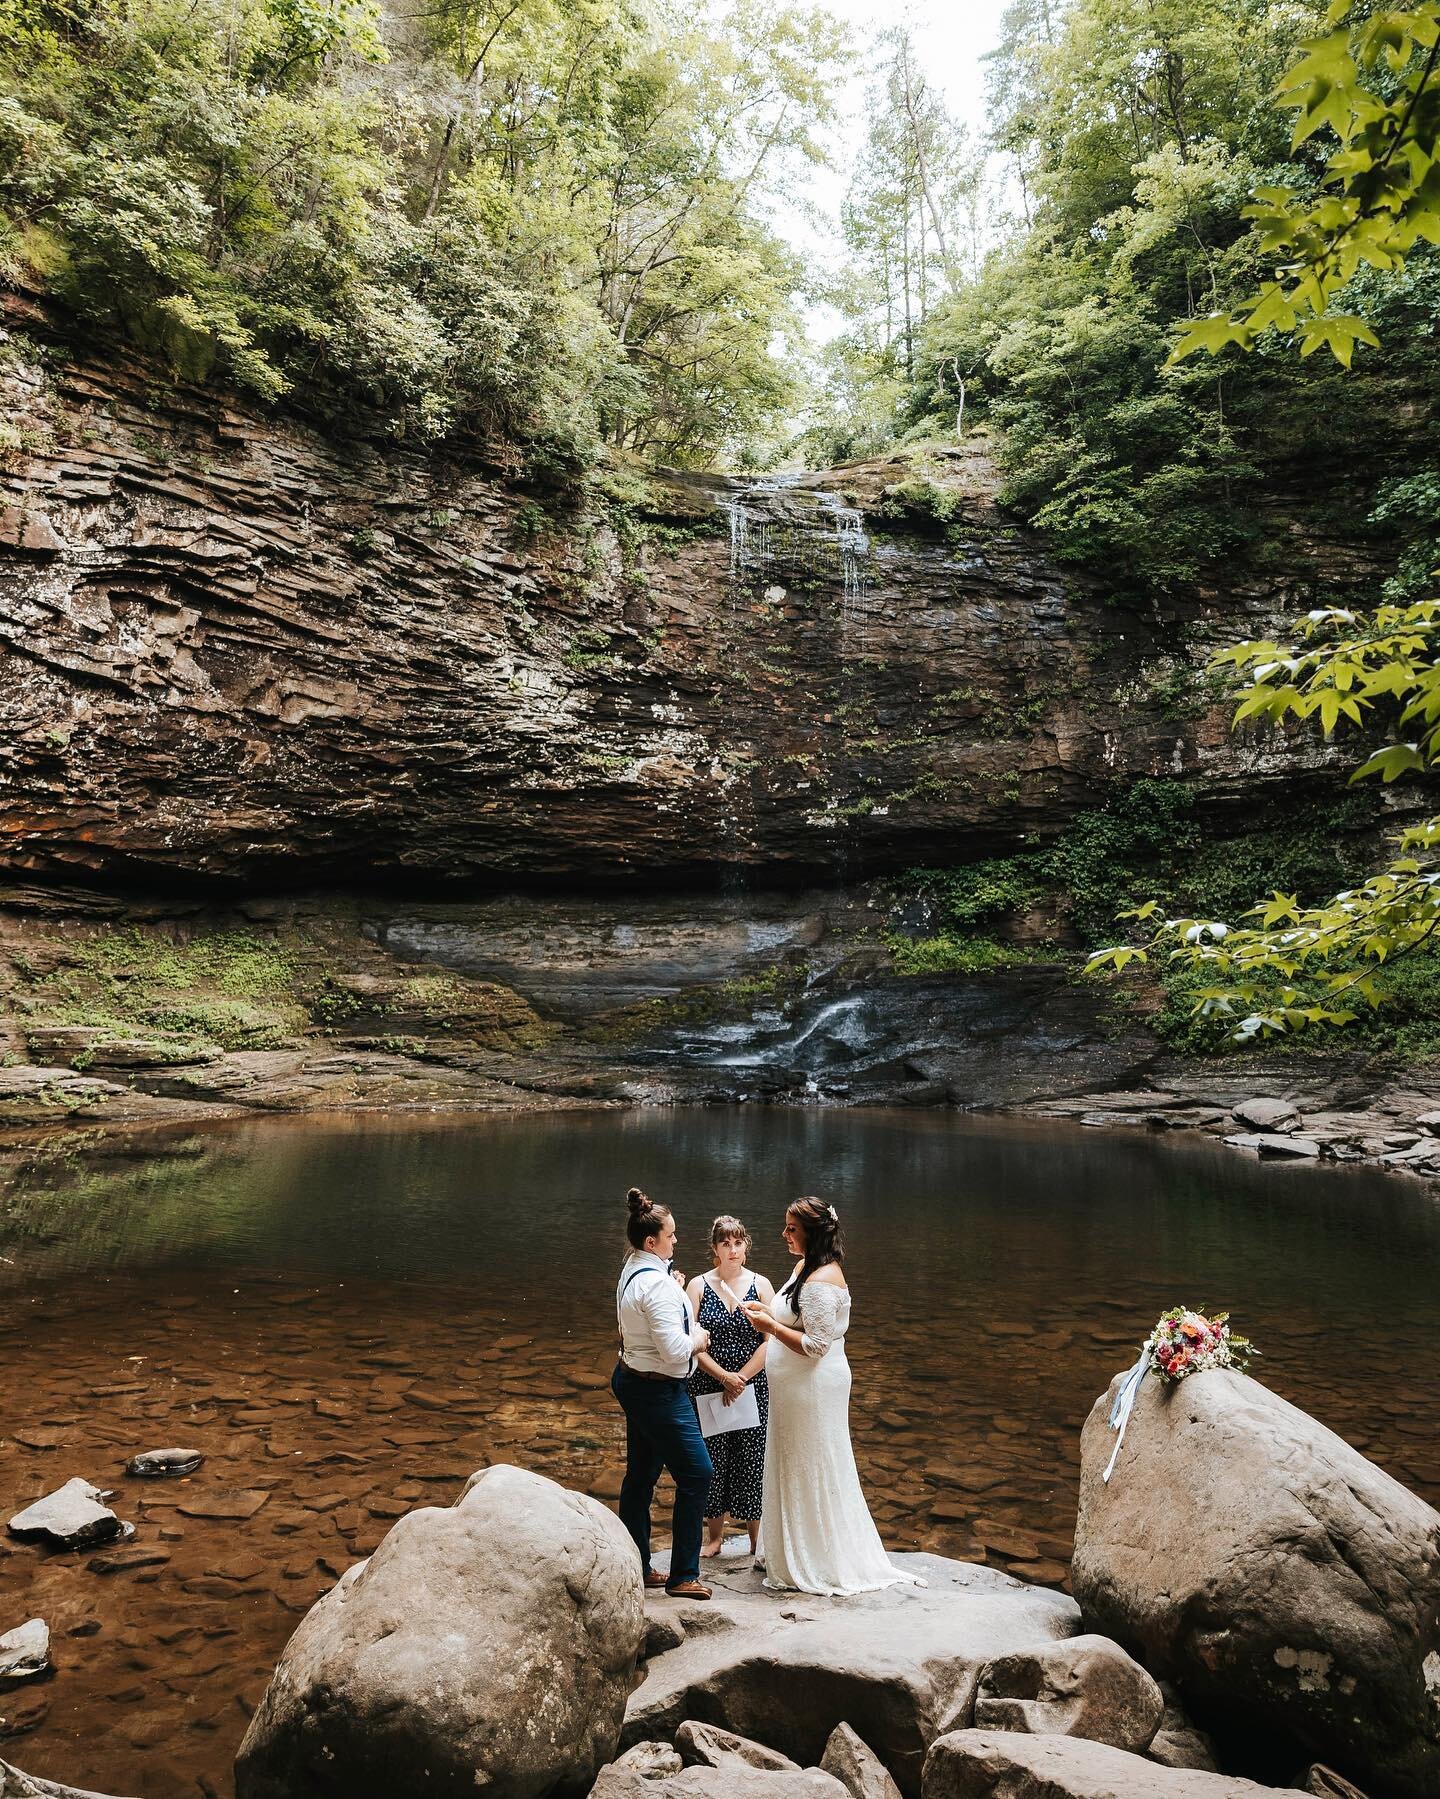 THEY&rsquo;RE MARRIED!!!!! Hiked down to the falls in cloudland canyon for the most beautiful elopement 🤍 

Congrats again you two. I&rsquo;m so so happy for y&rsquo;all!!!!